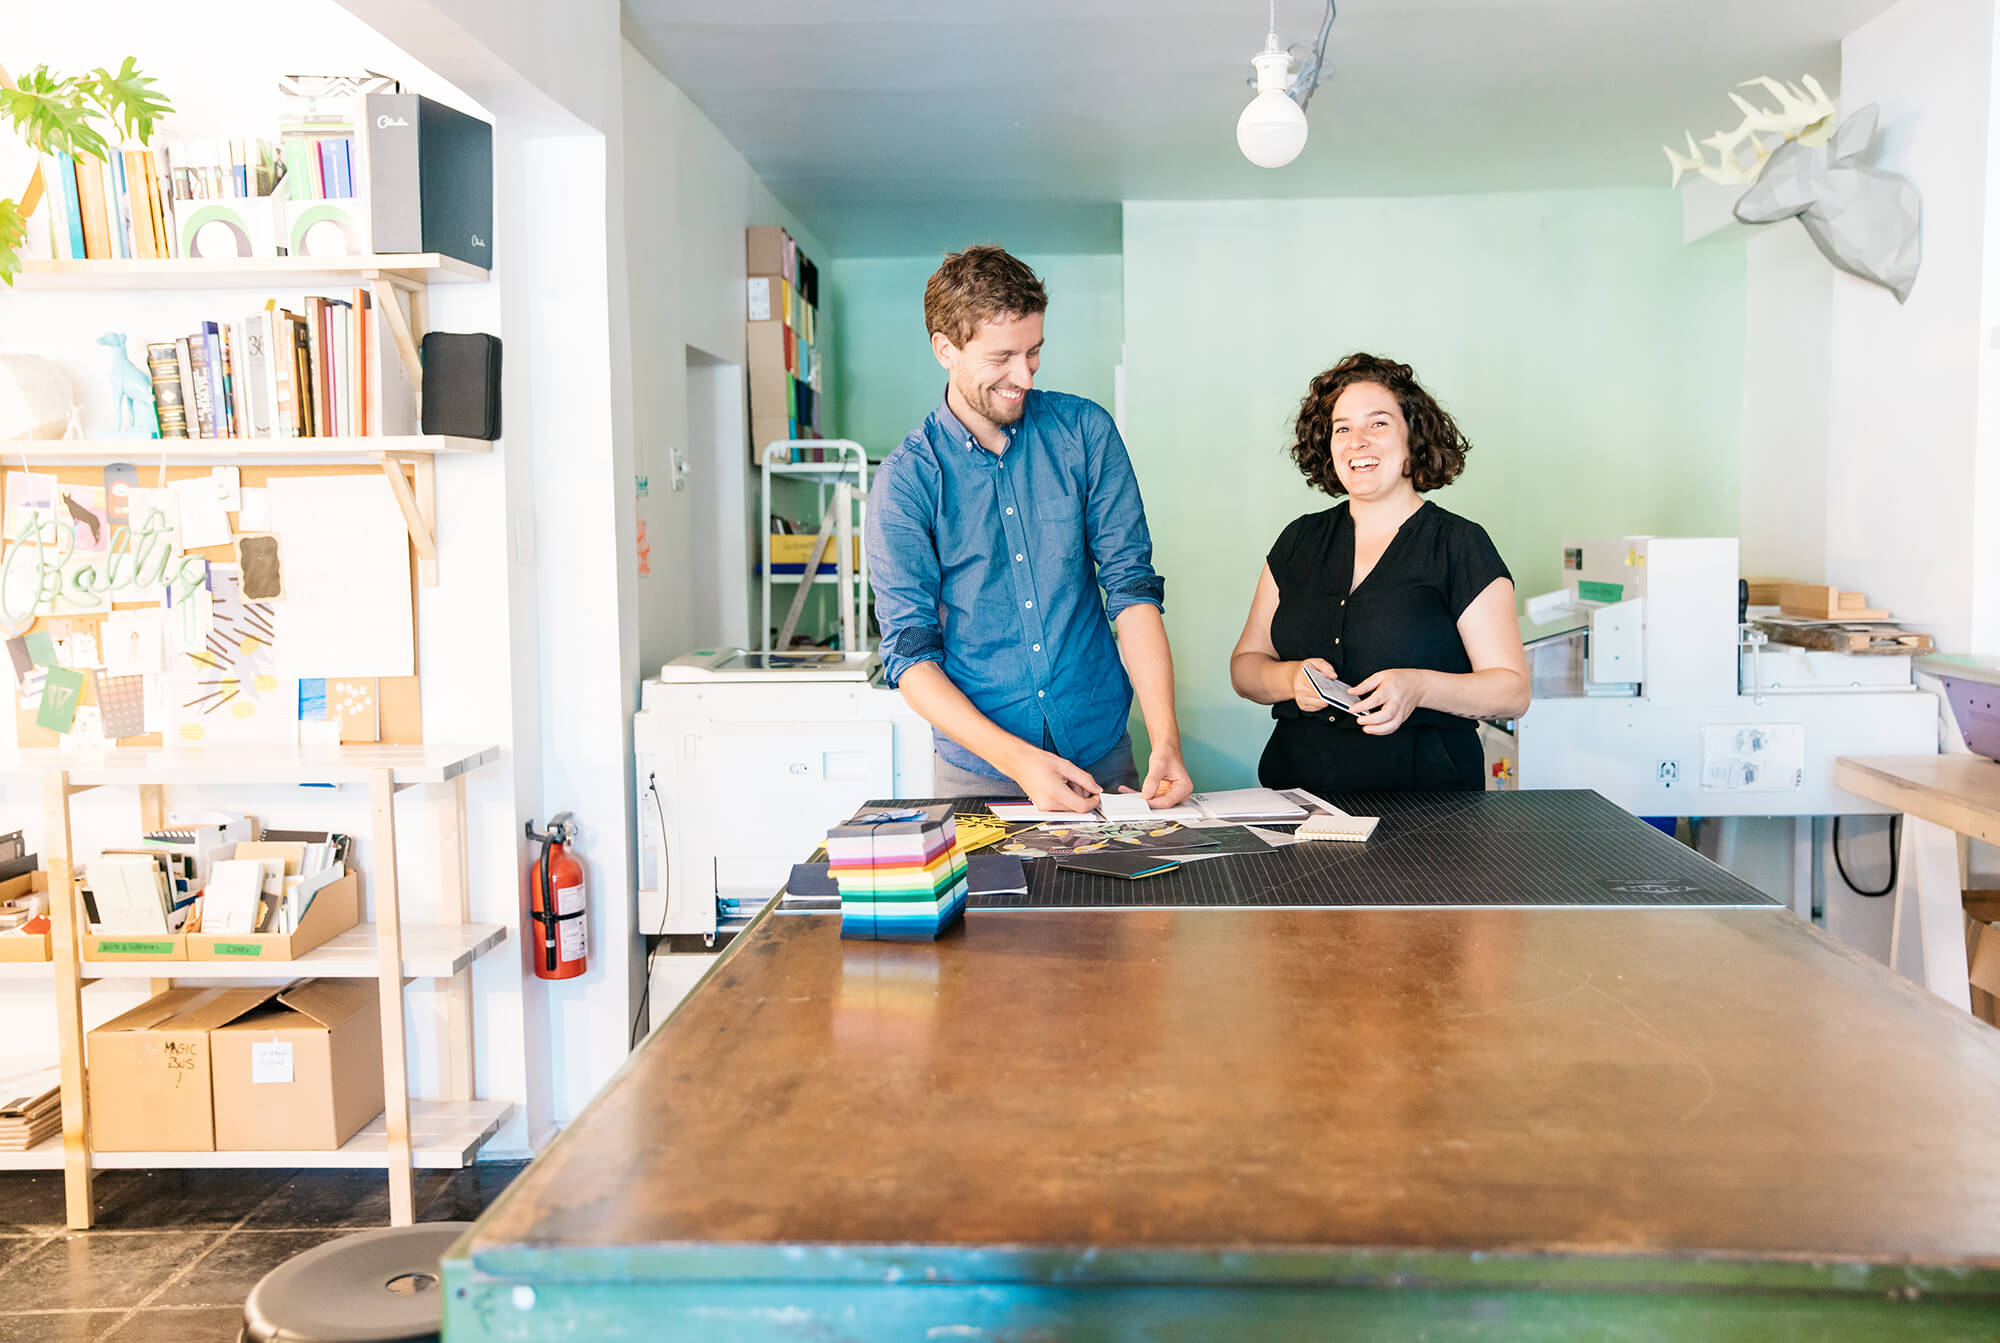 Brice Salmon and Melanie Ouellette co-founders of Baltic Club in their creative studio